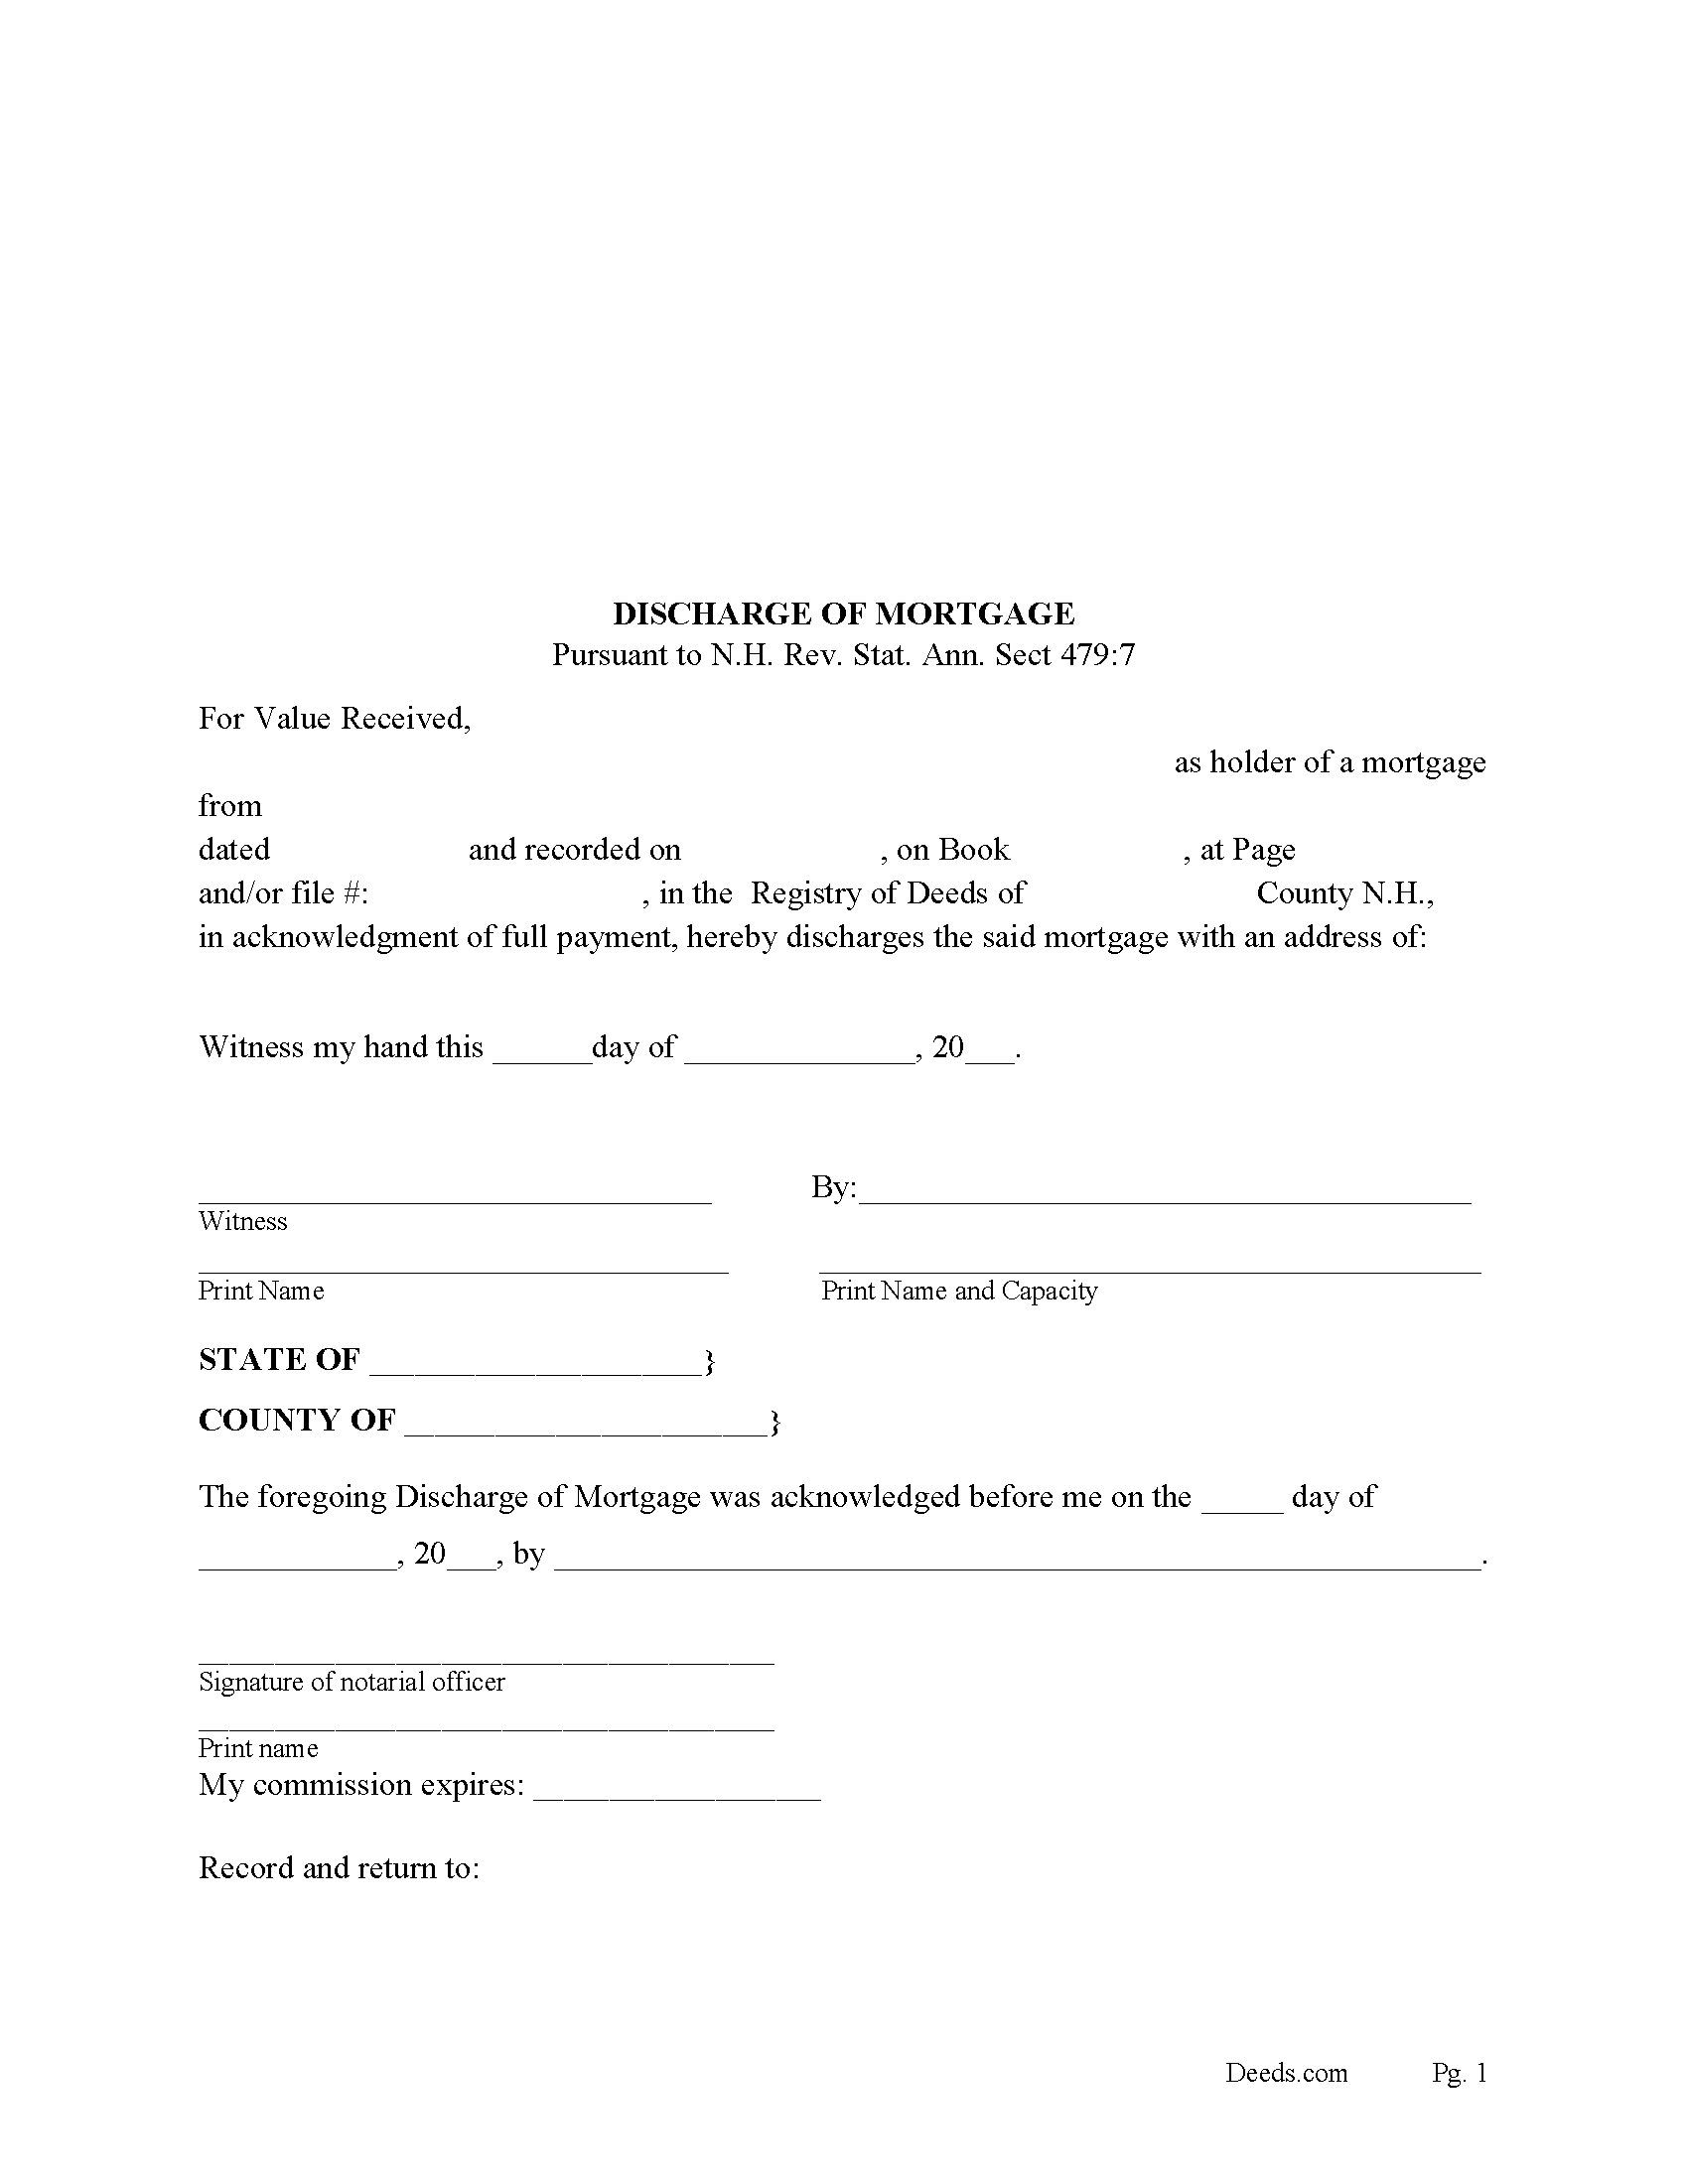 Discharge of Mortgage Form